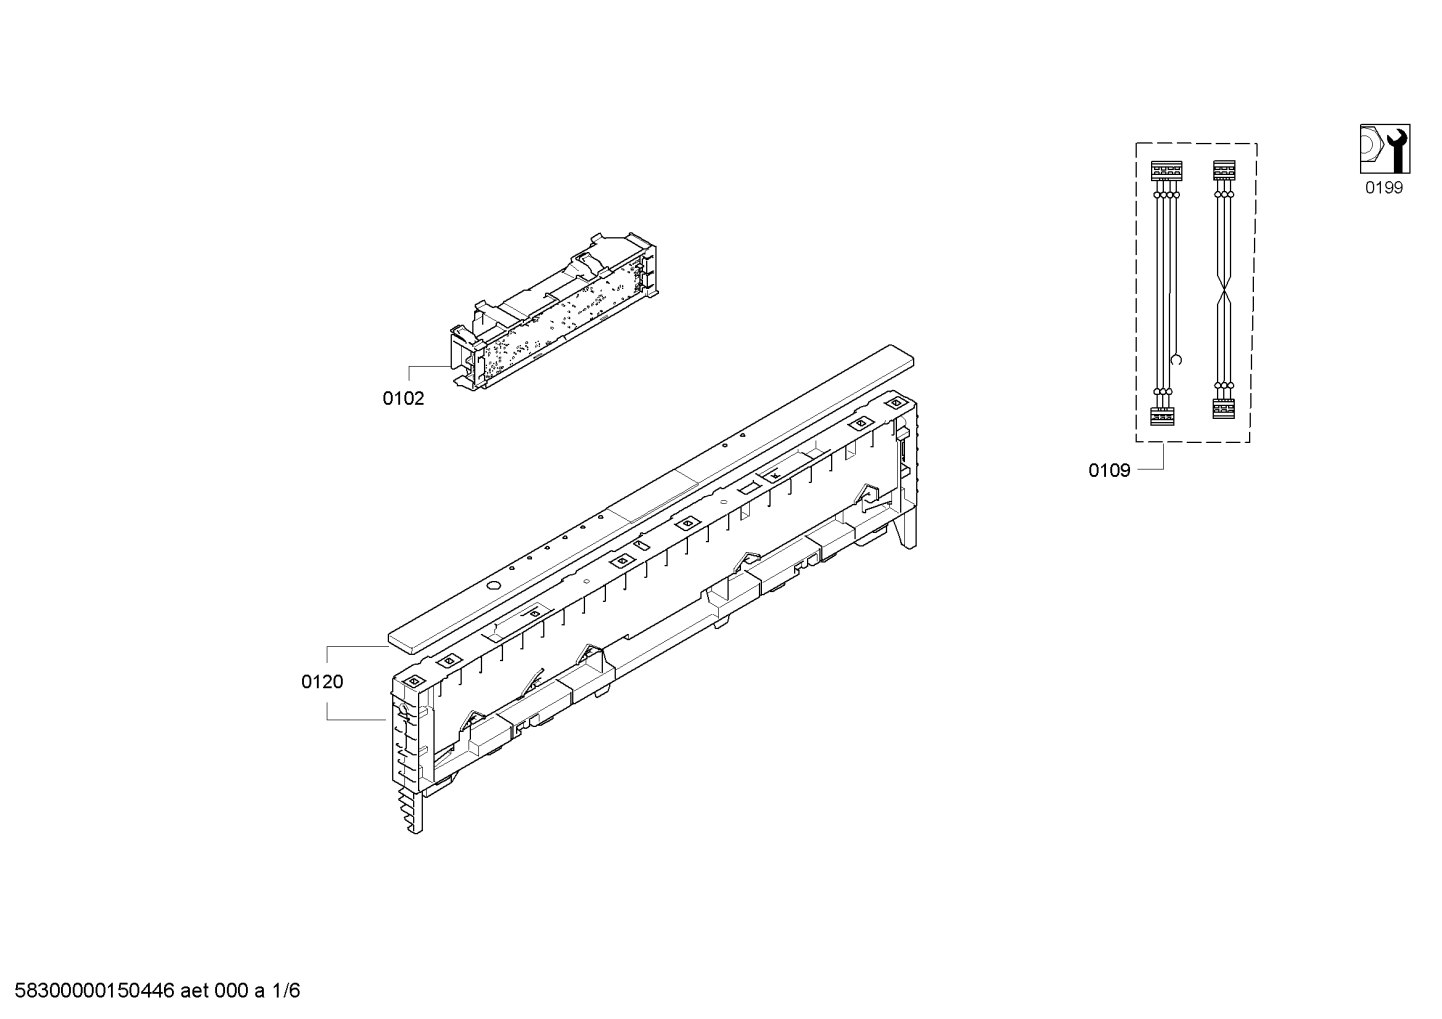 drawing_link_1_device_1767531